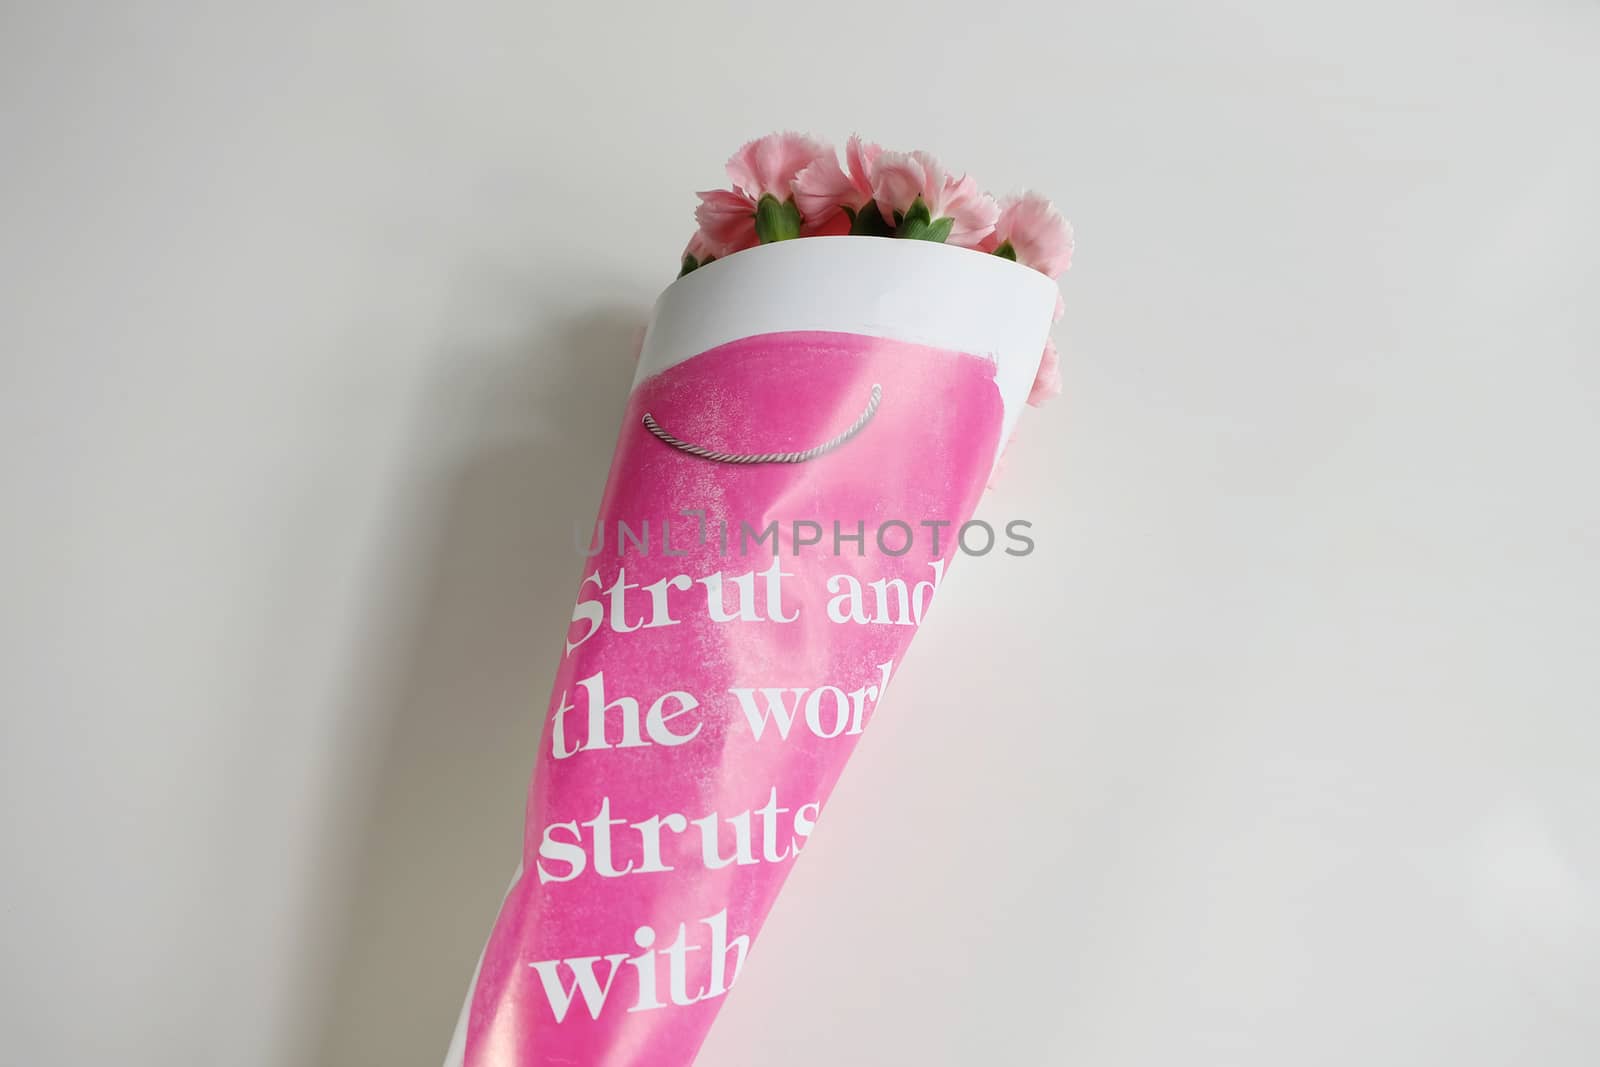 Bouquet of pink carnations wrapped in paper